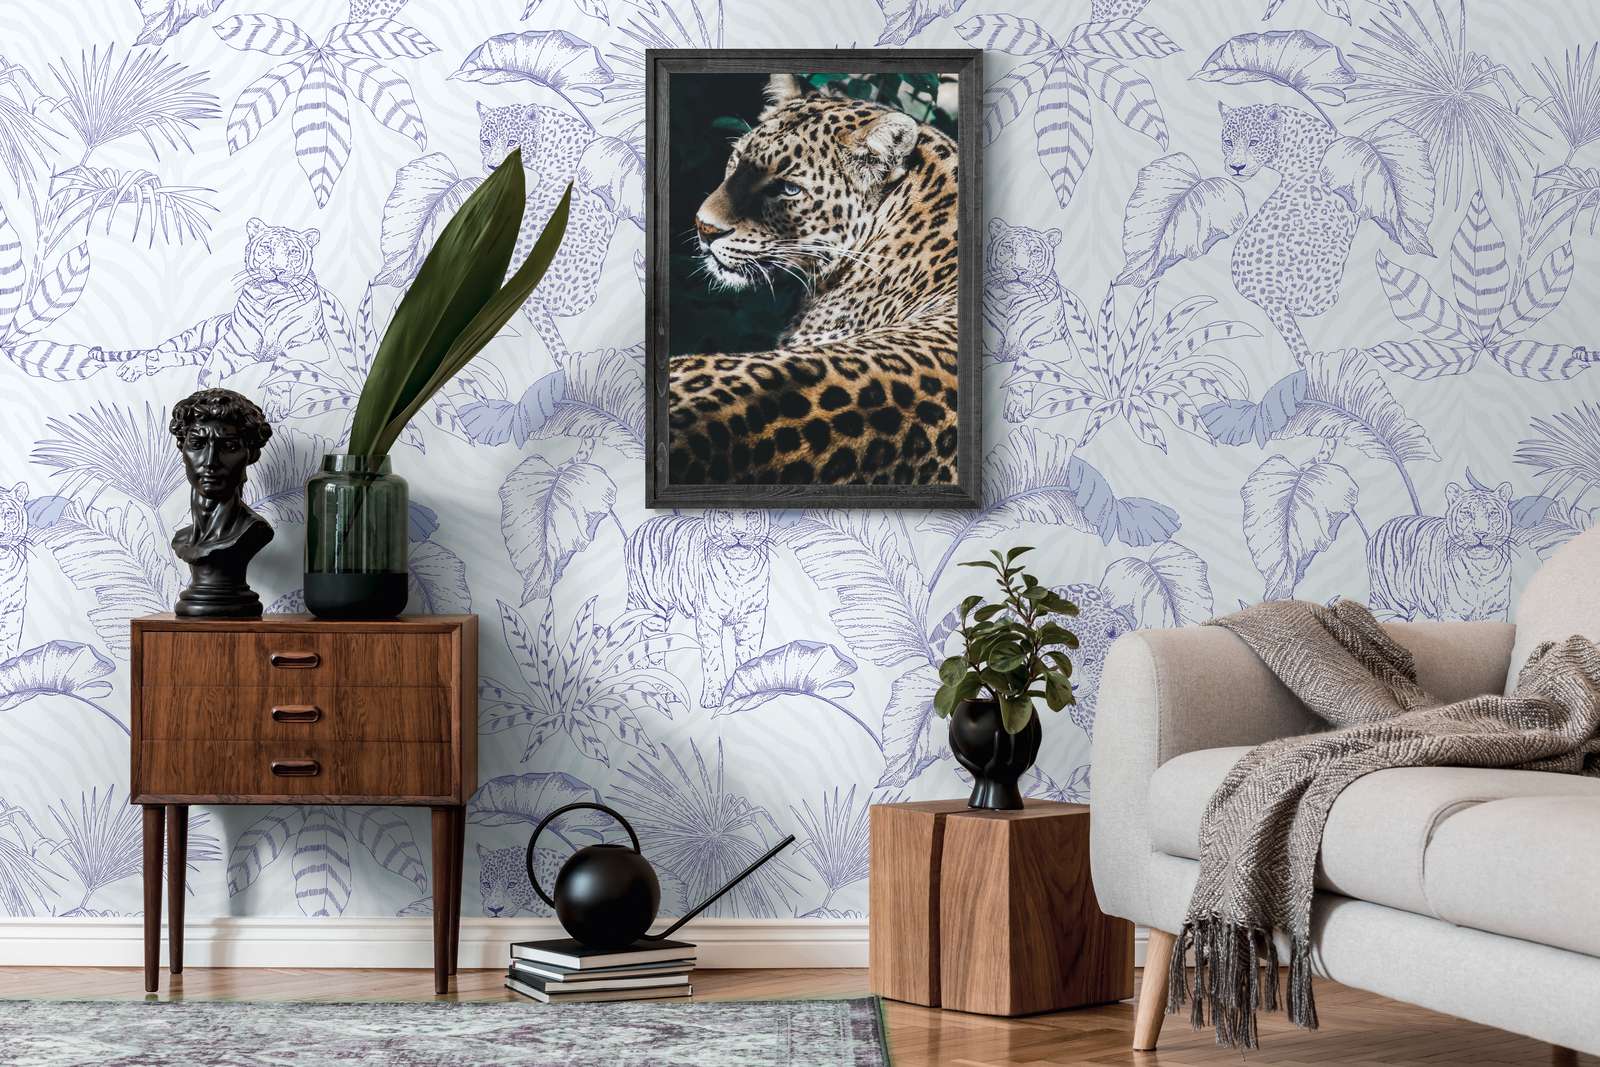             Jungle motif non-woven wallpaper with tigers and leopards - purple, white
        